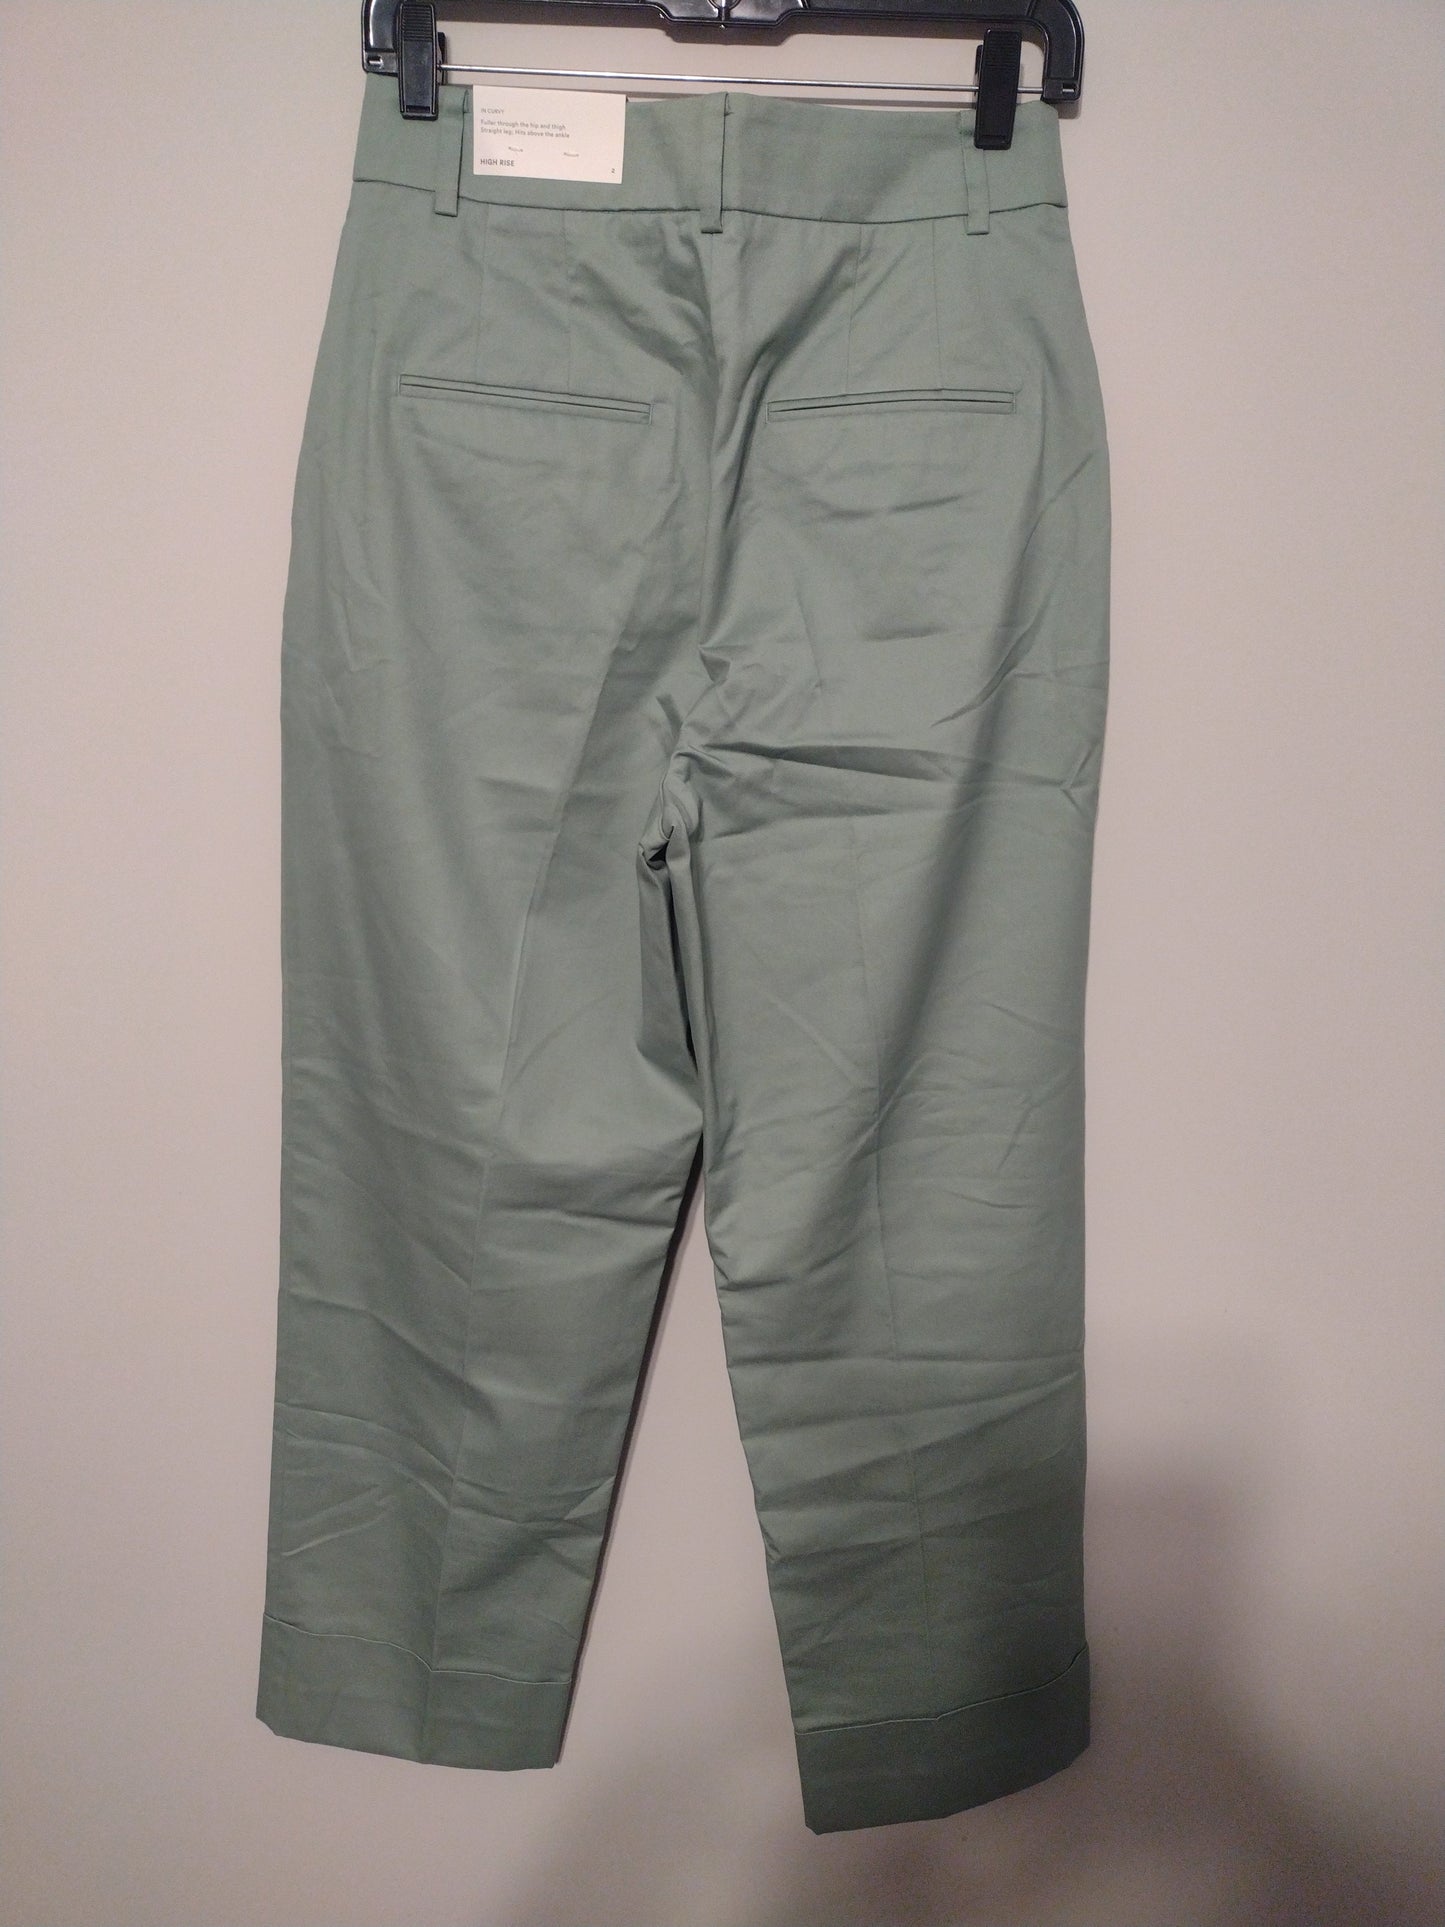 Pants Ankle By Ann Taylor  Size: 2